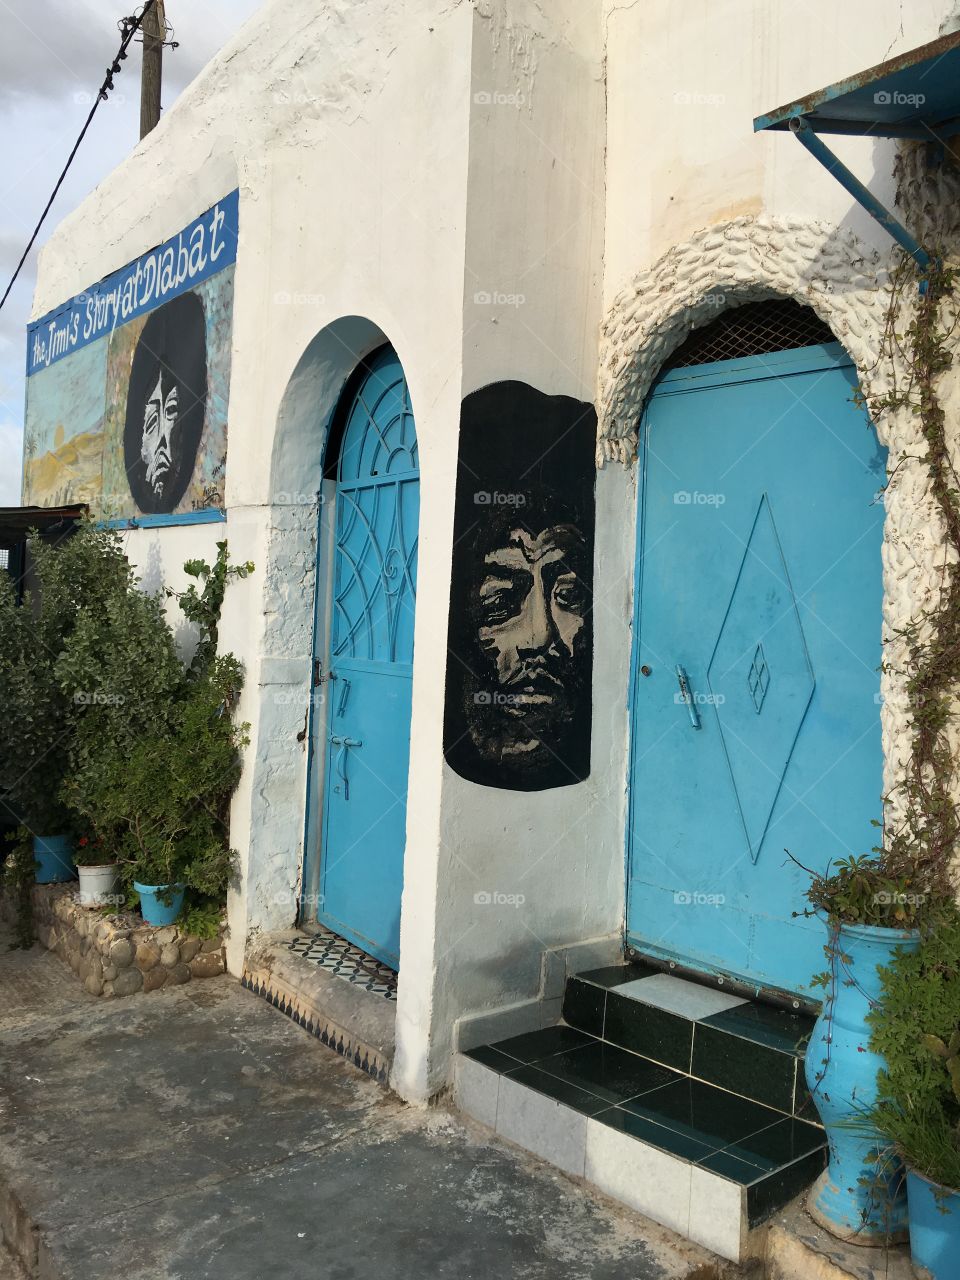 Cafe and restaurant that jimi Hendrix hung out in the 1960 